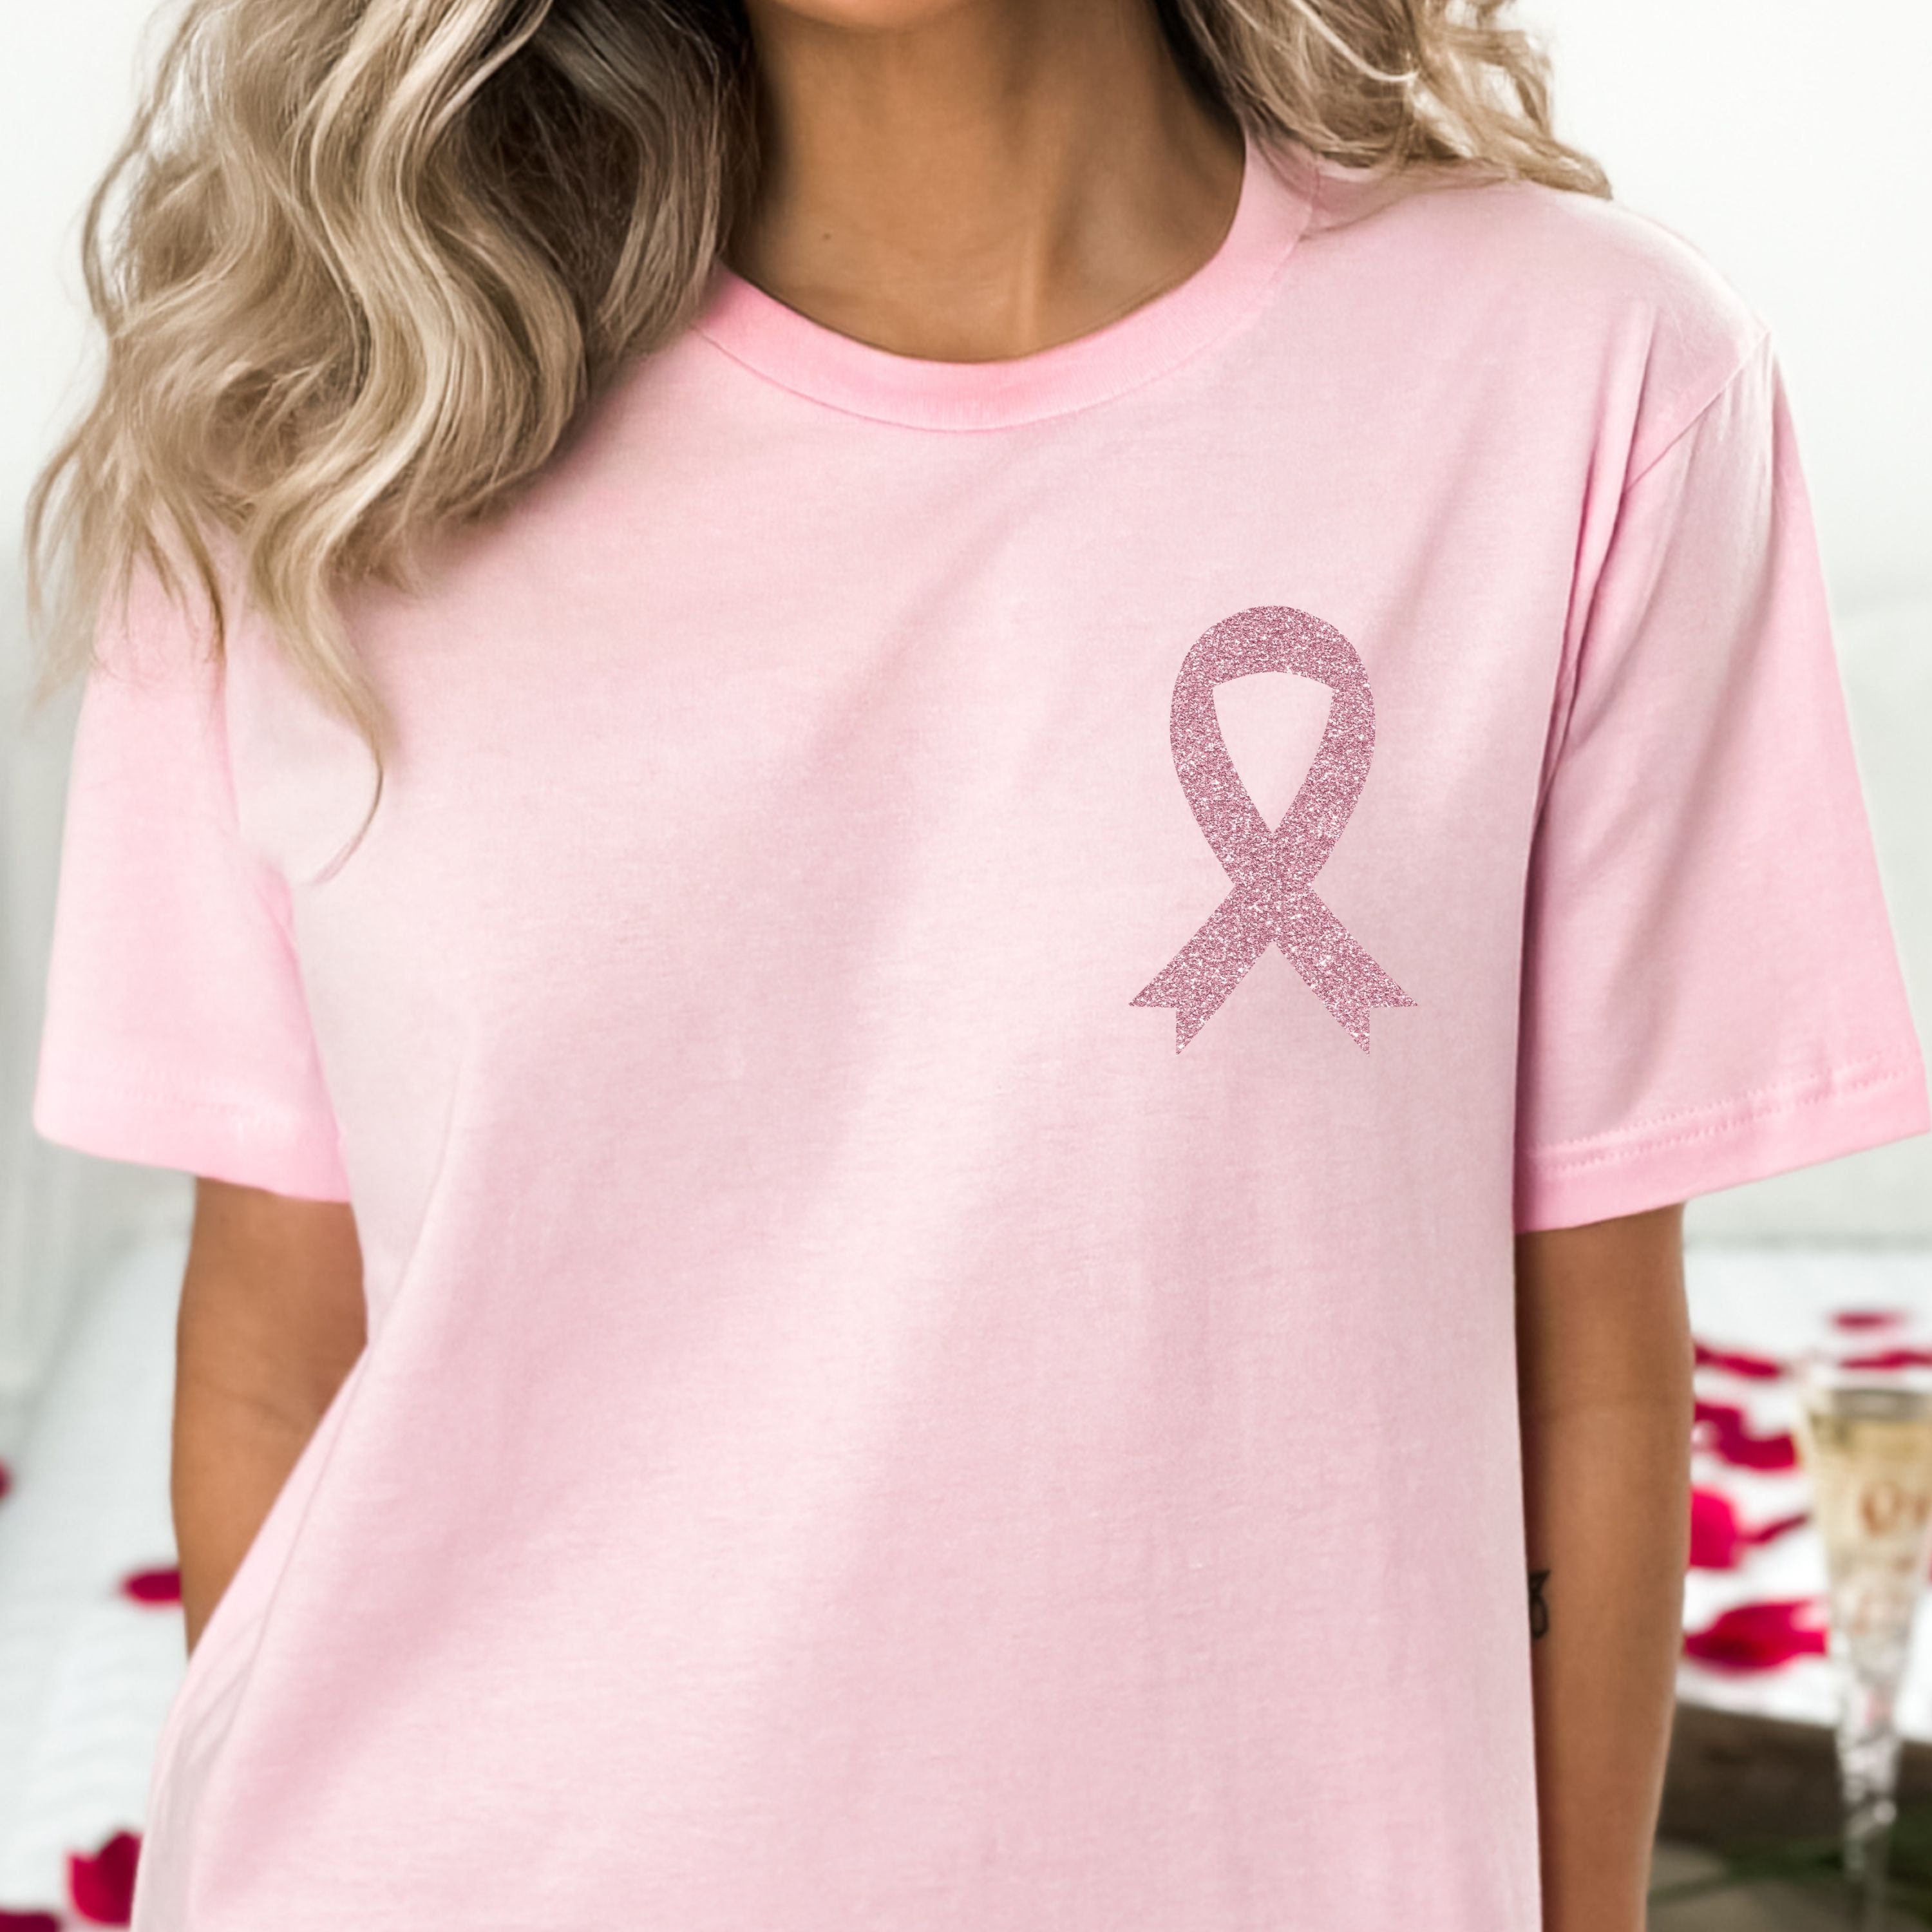 WildlyFreeTeeShop in October We Wear Pink T Shirt, Breast Cancer Awareness Shirts, Cancer Survivor Shirt, Breast Cancer Awareness Gift, Pink Ribbon Shirts